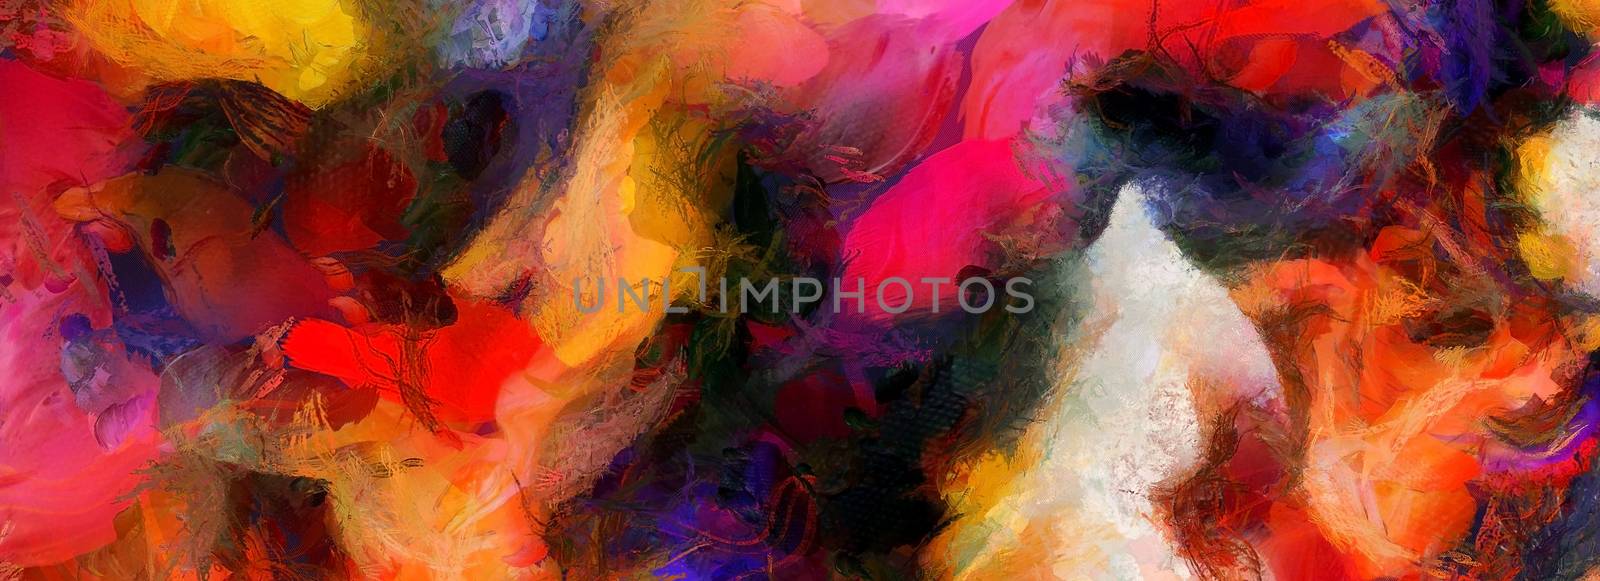 Vivid Abstract Painting. Wide brush strokes. Artwork for creative graphic design